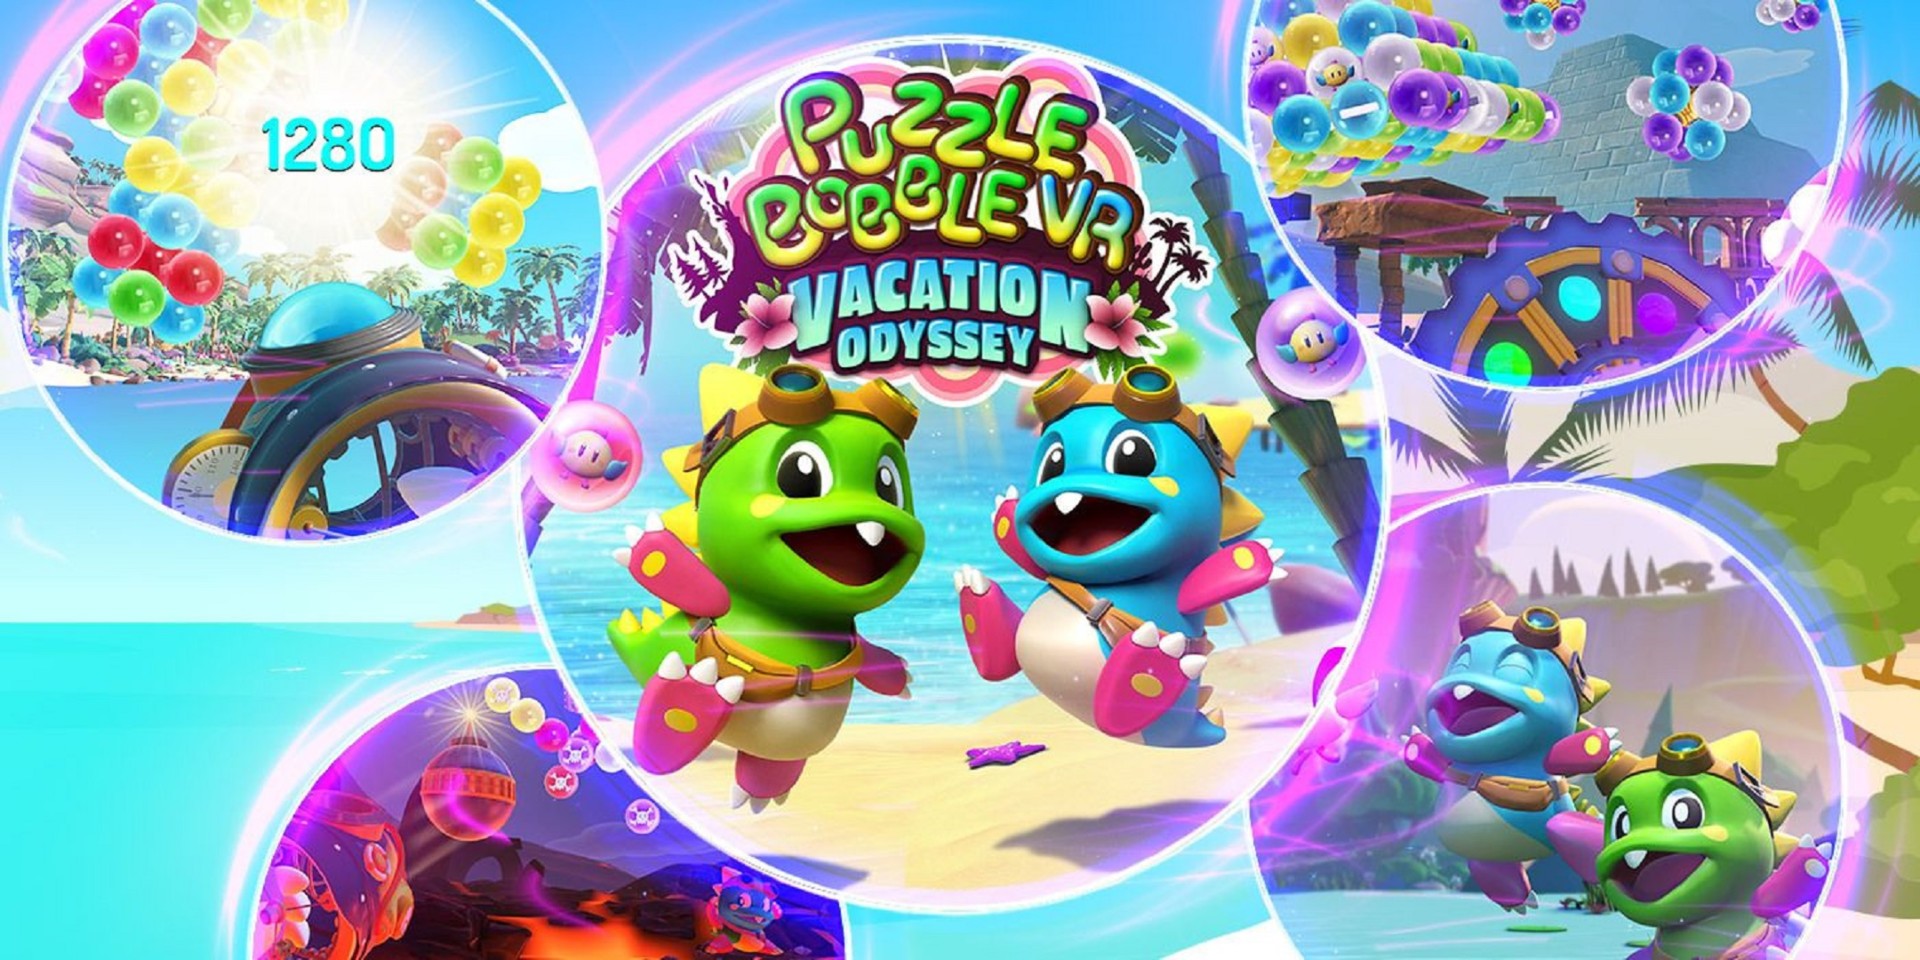 Puzzle Bubble VR brings back a classic franchise and a Fun VR world anyone can play